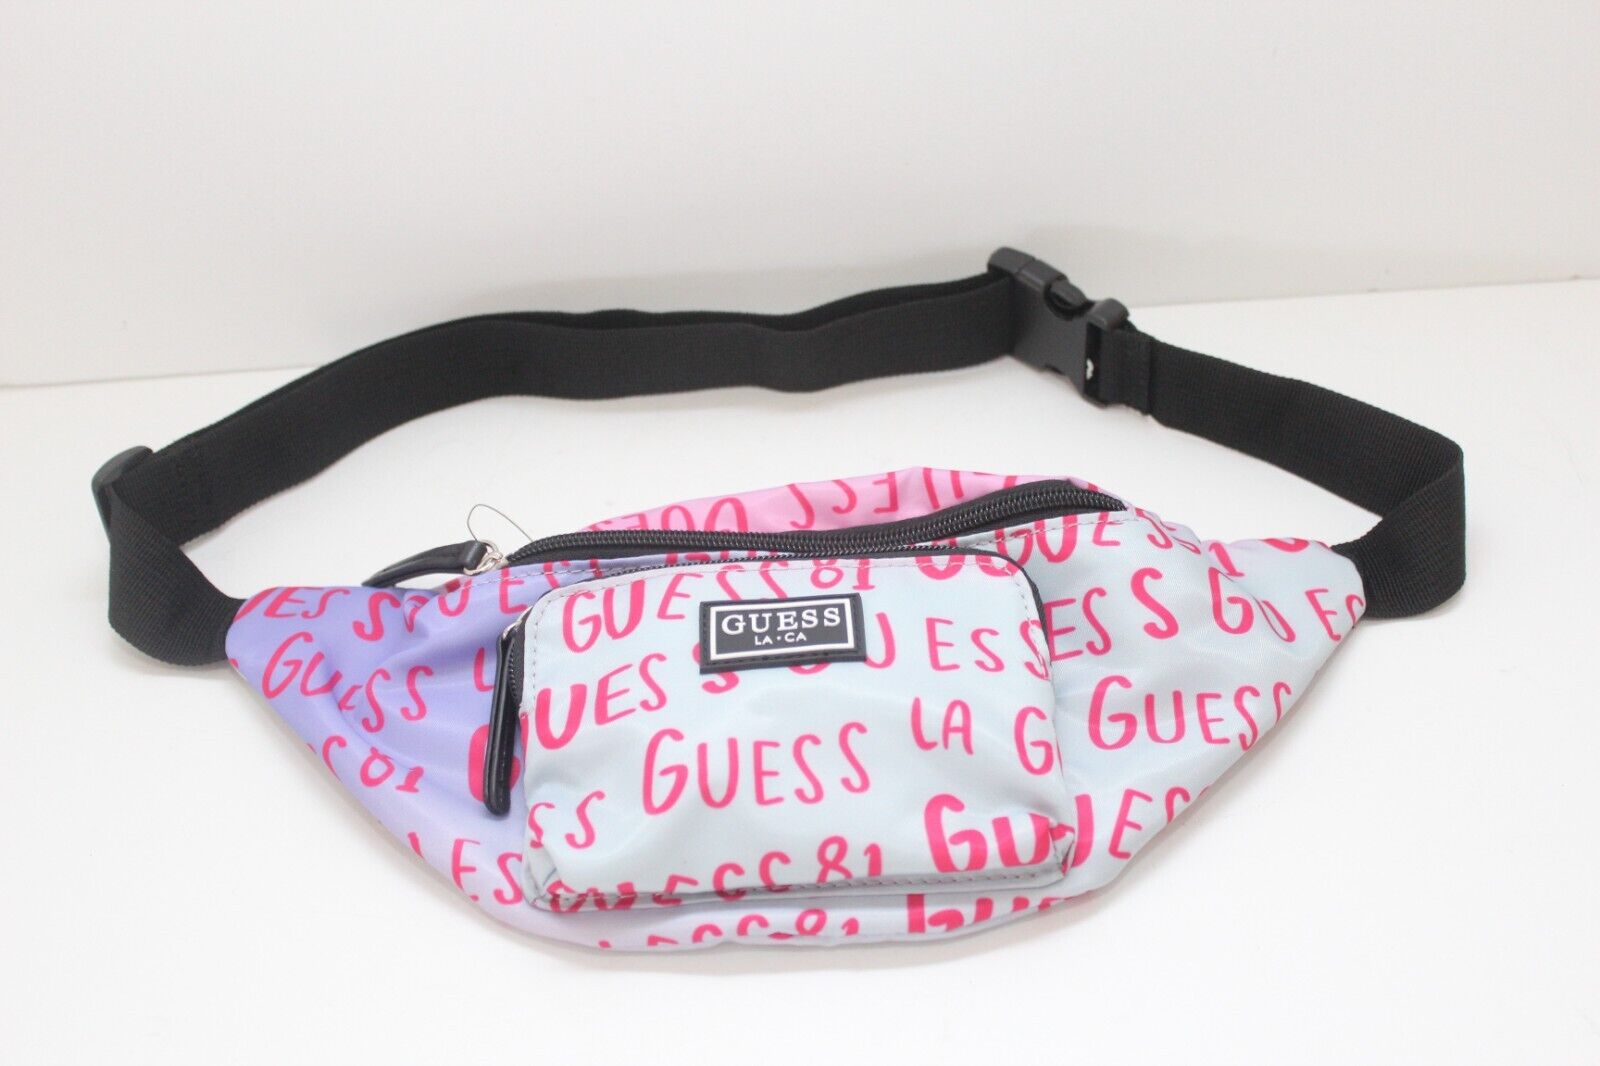 GUESS Logo Tape Fanny Pack- Pink Multi